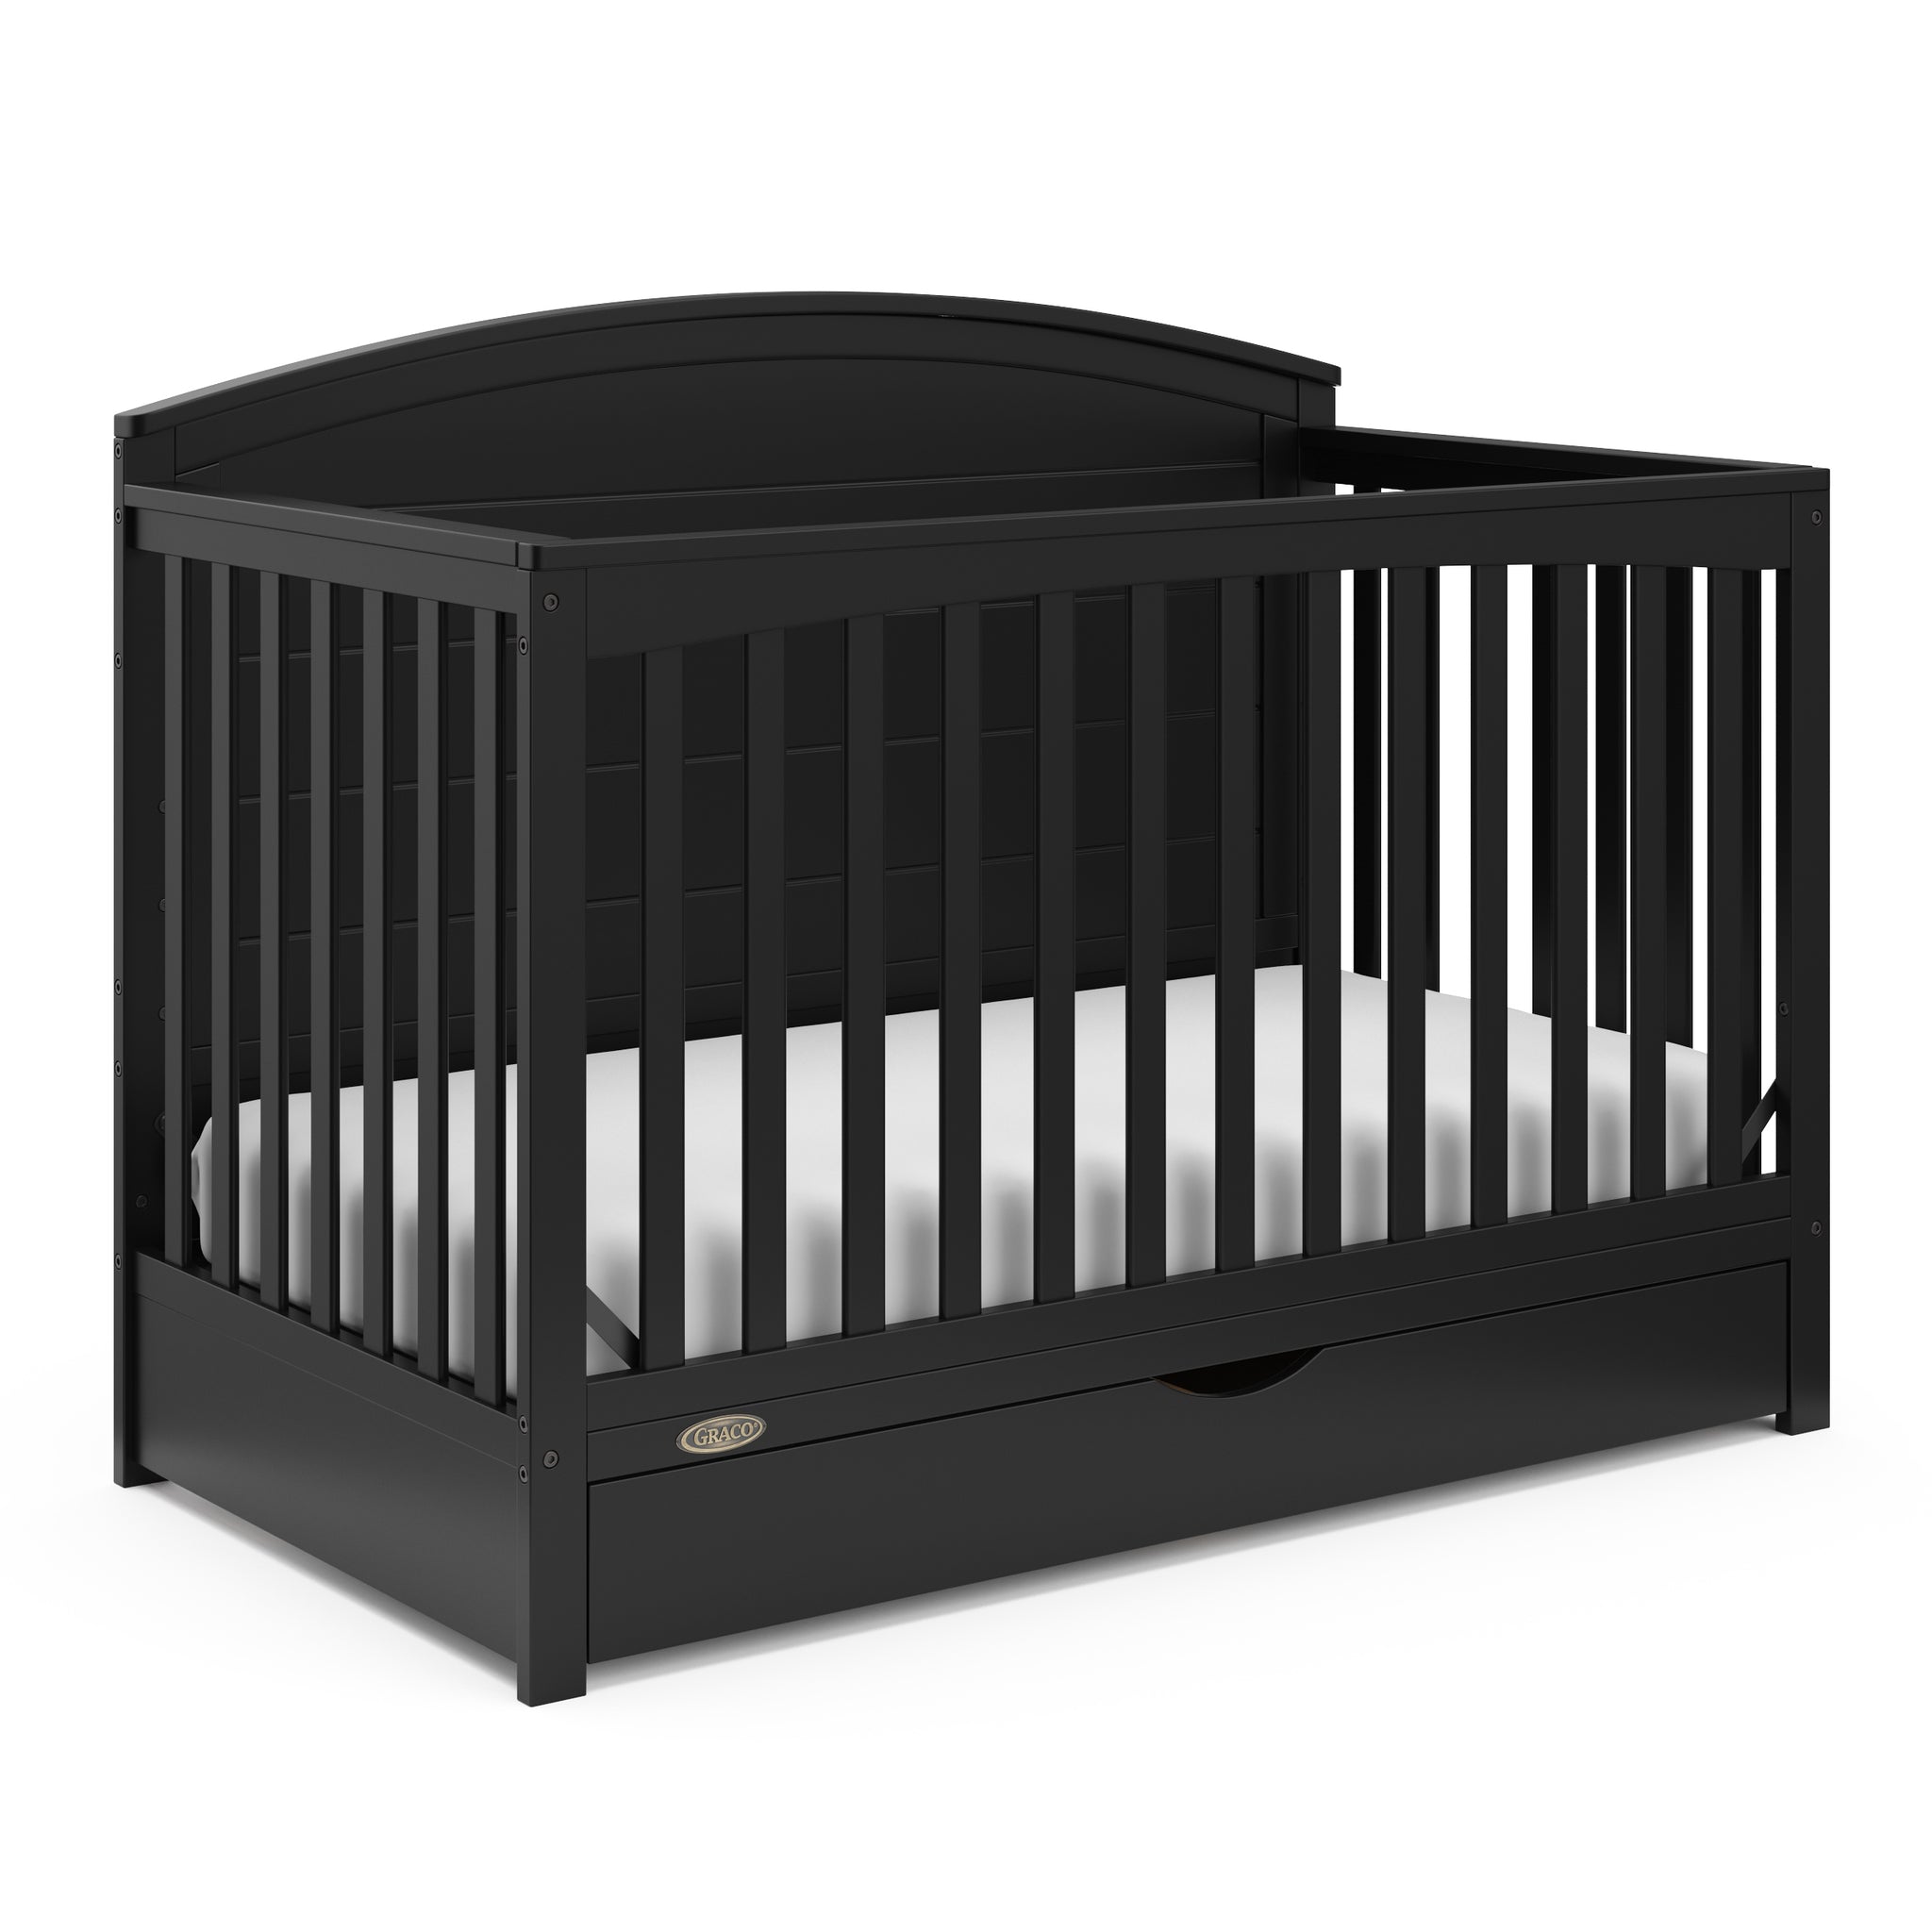 Convertible black crib viewed from an angle